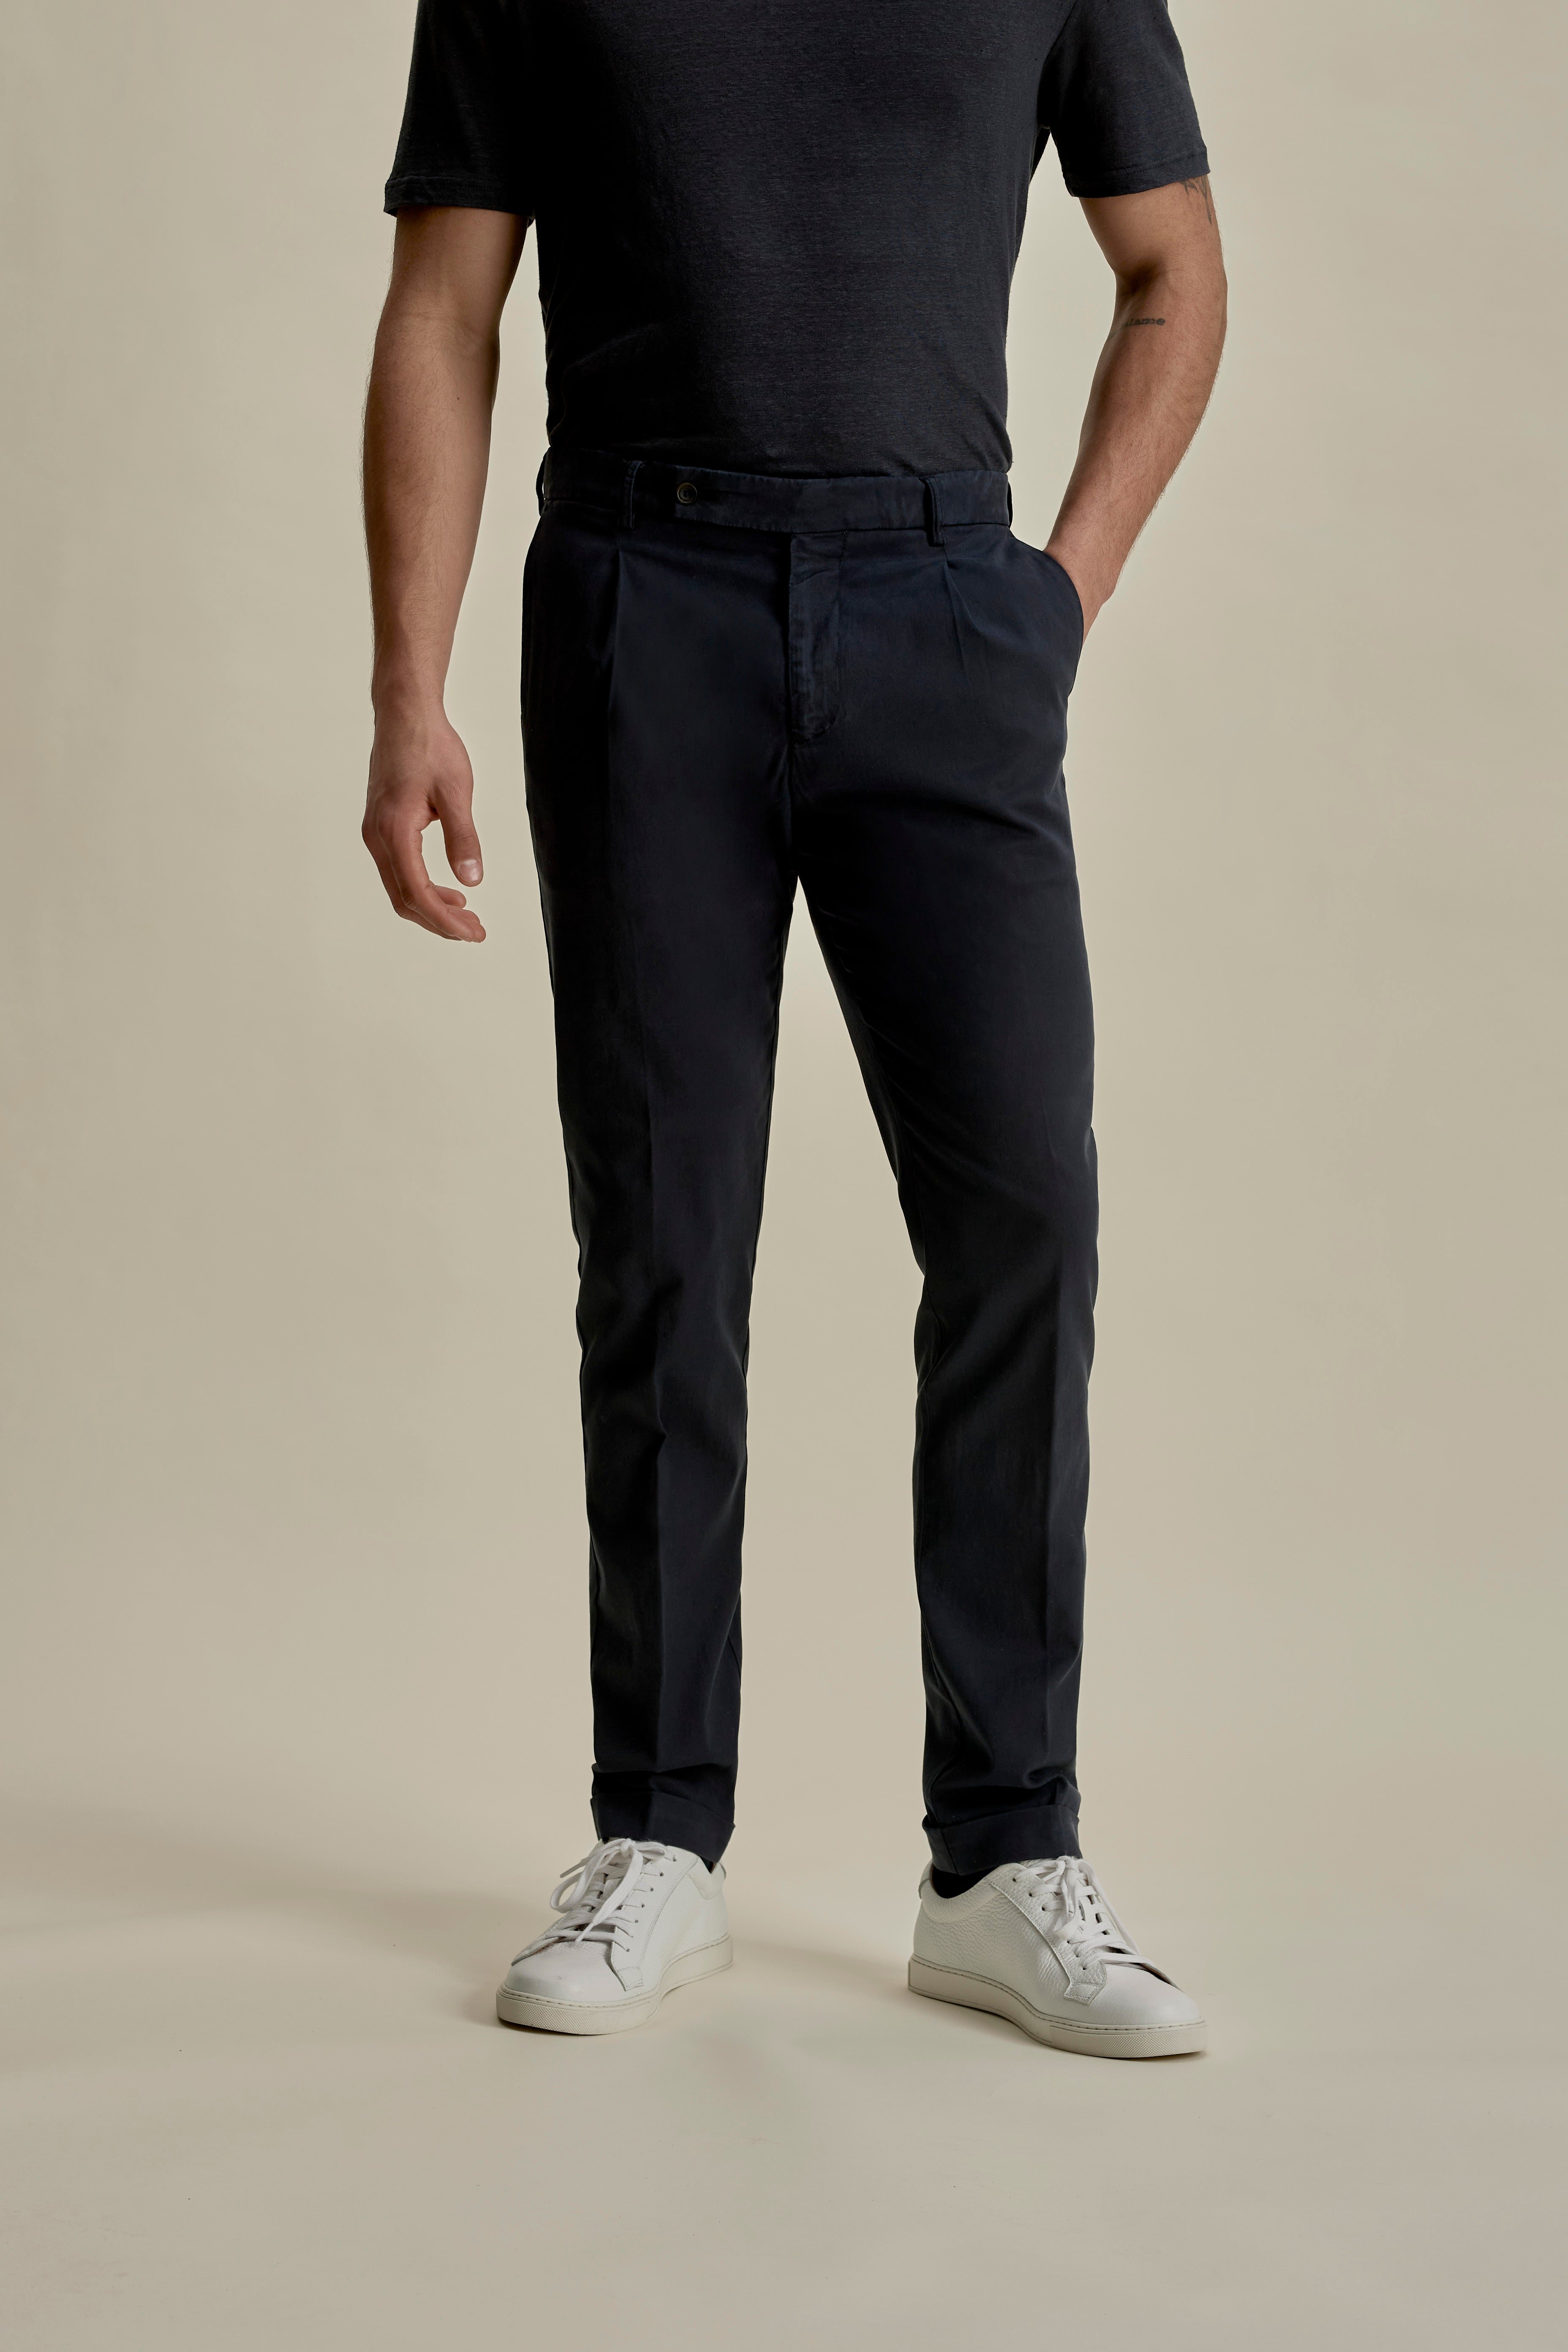 Cotton Single Pleat Chinos Navy Cropped Model Image